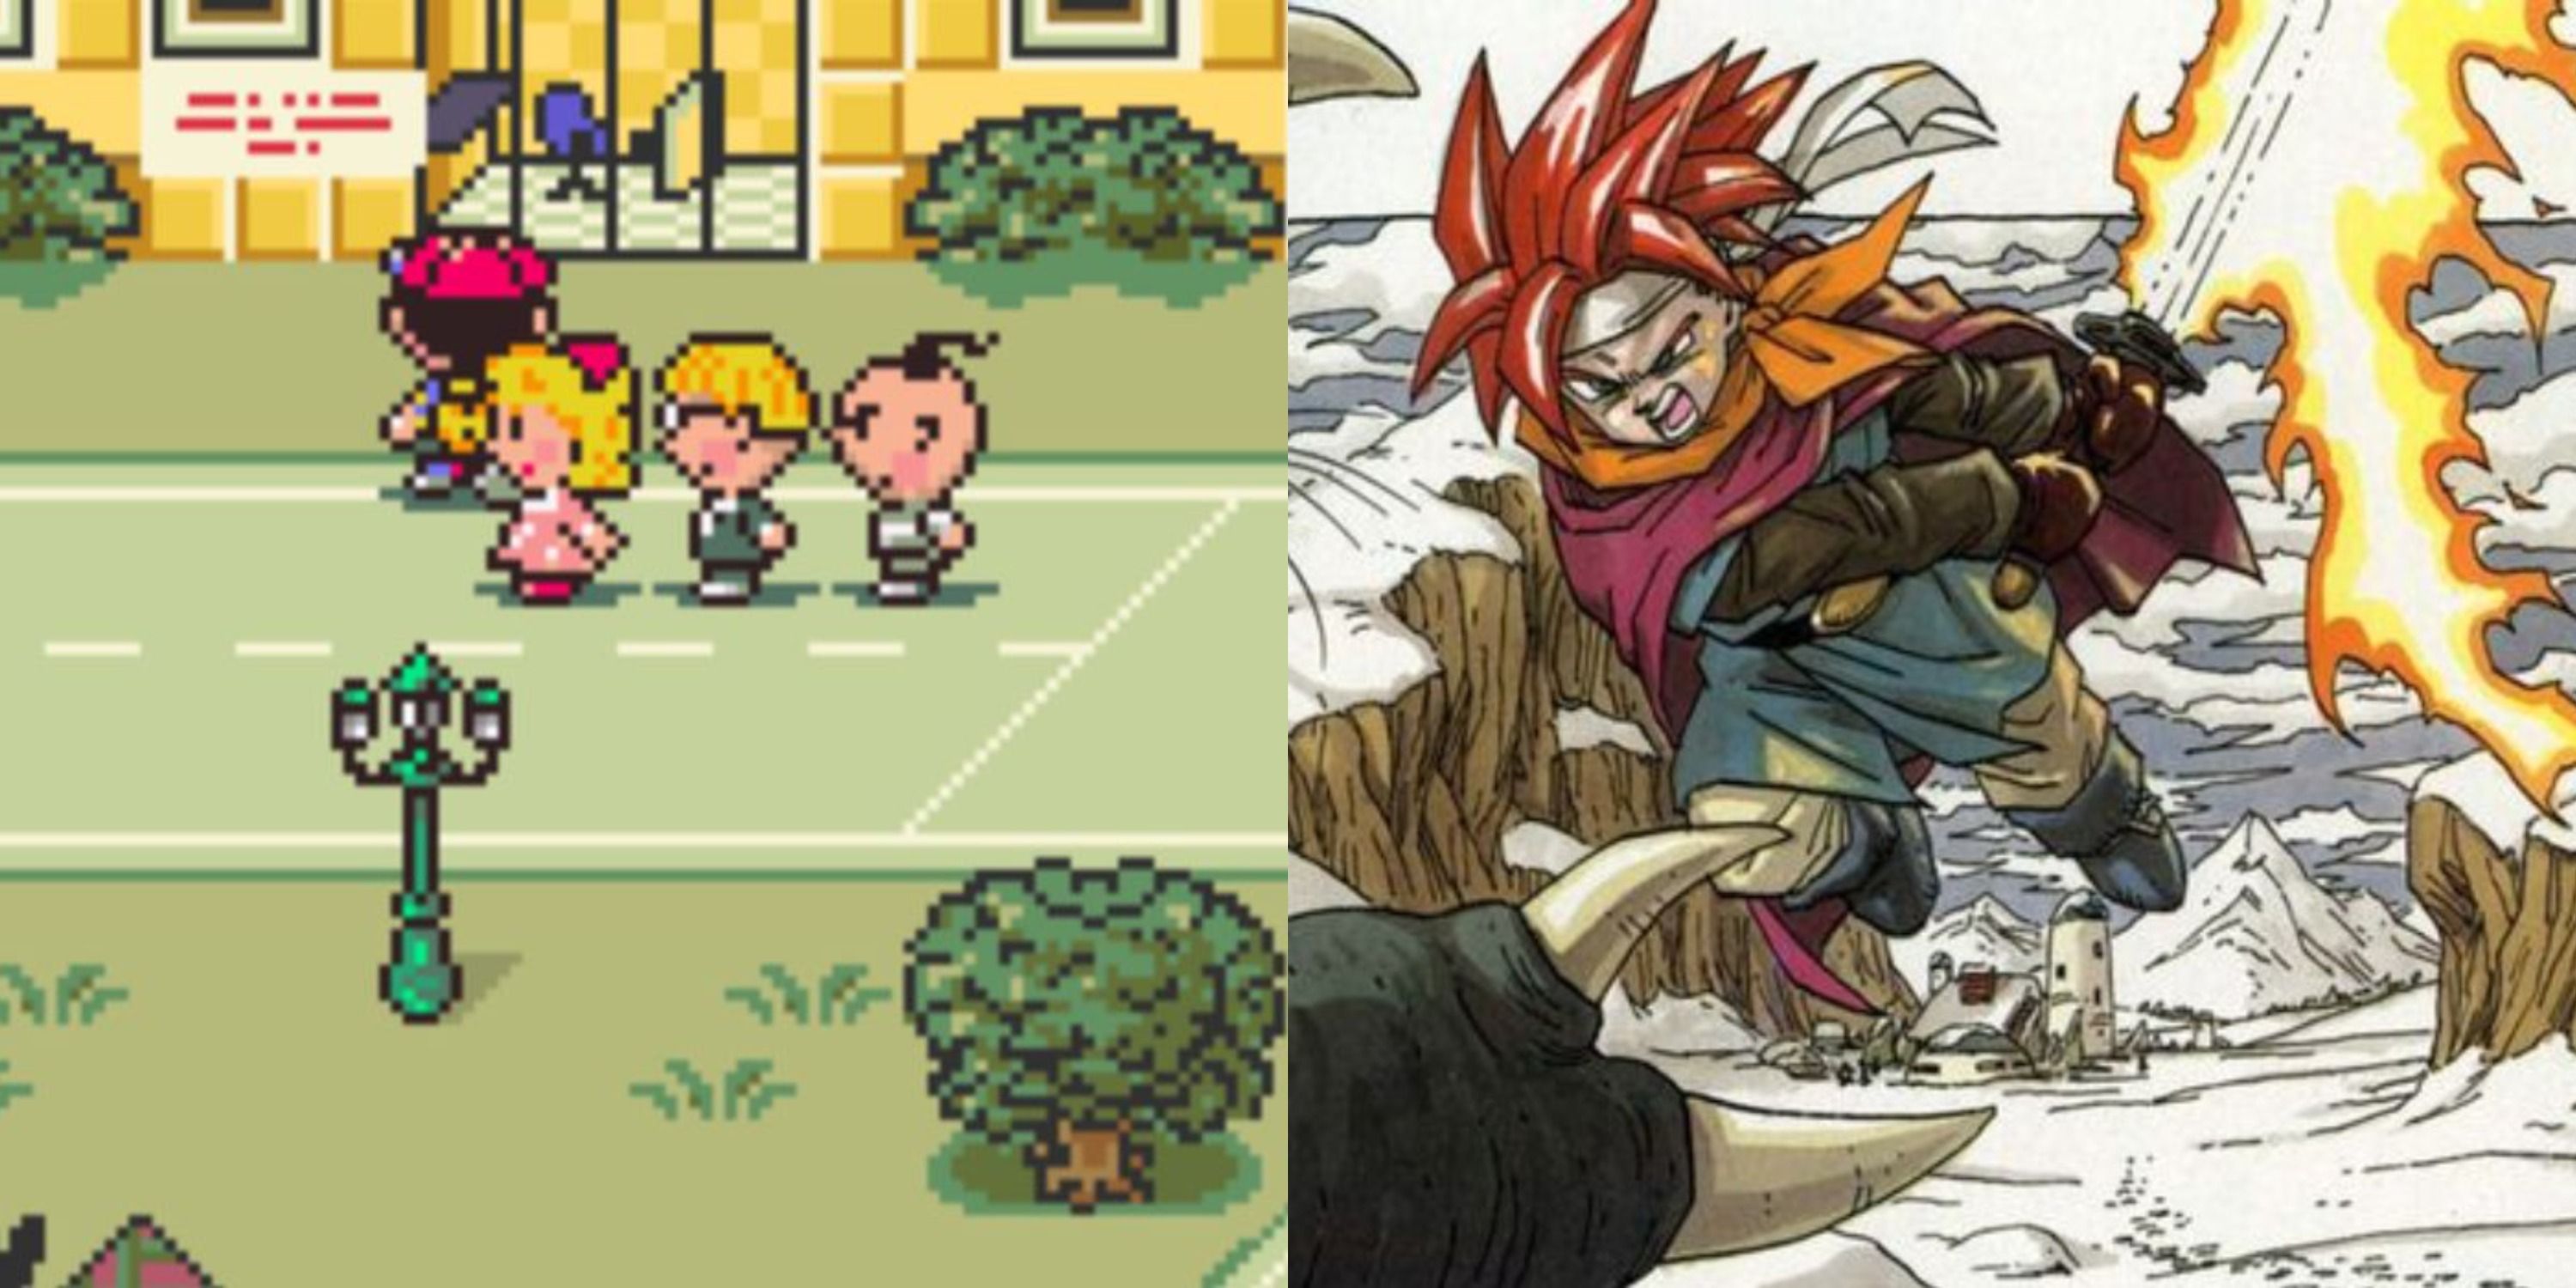 EarthBound gameplay and cover art for Chrono Trigger